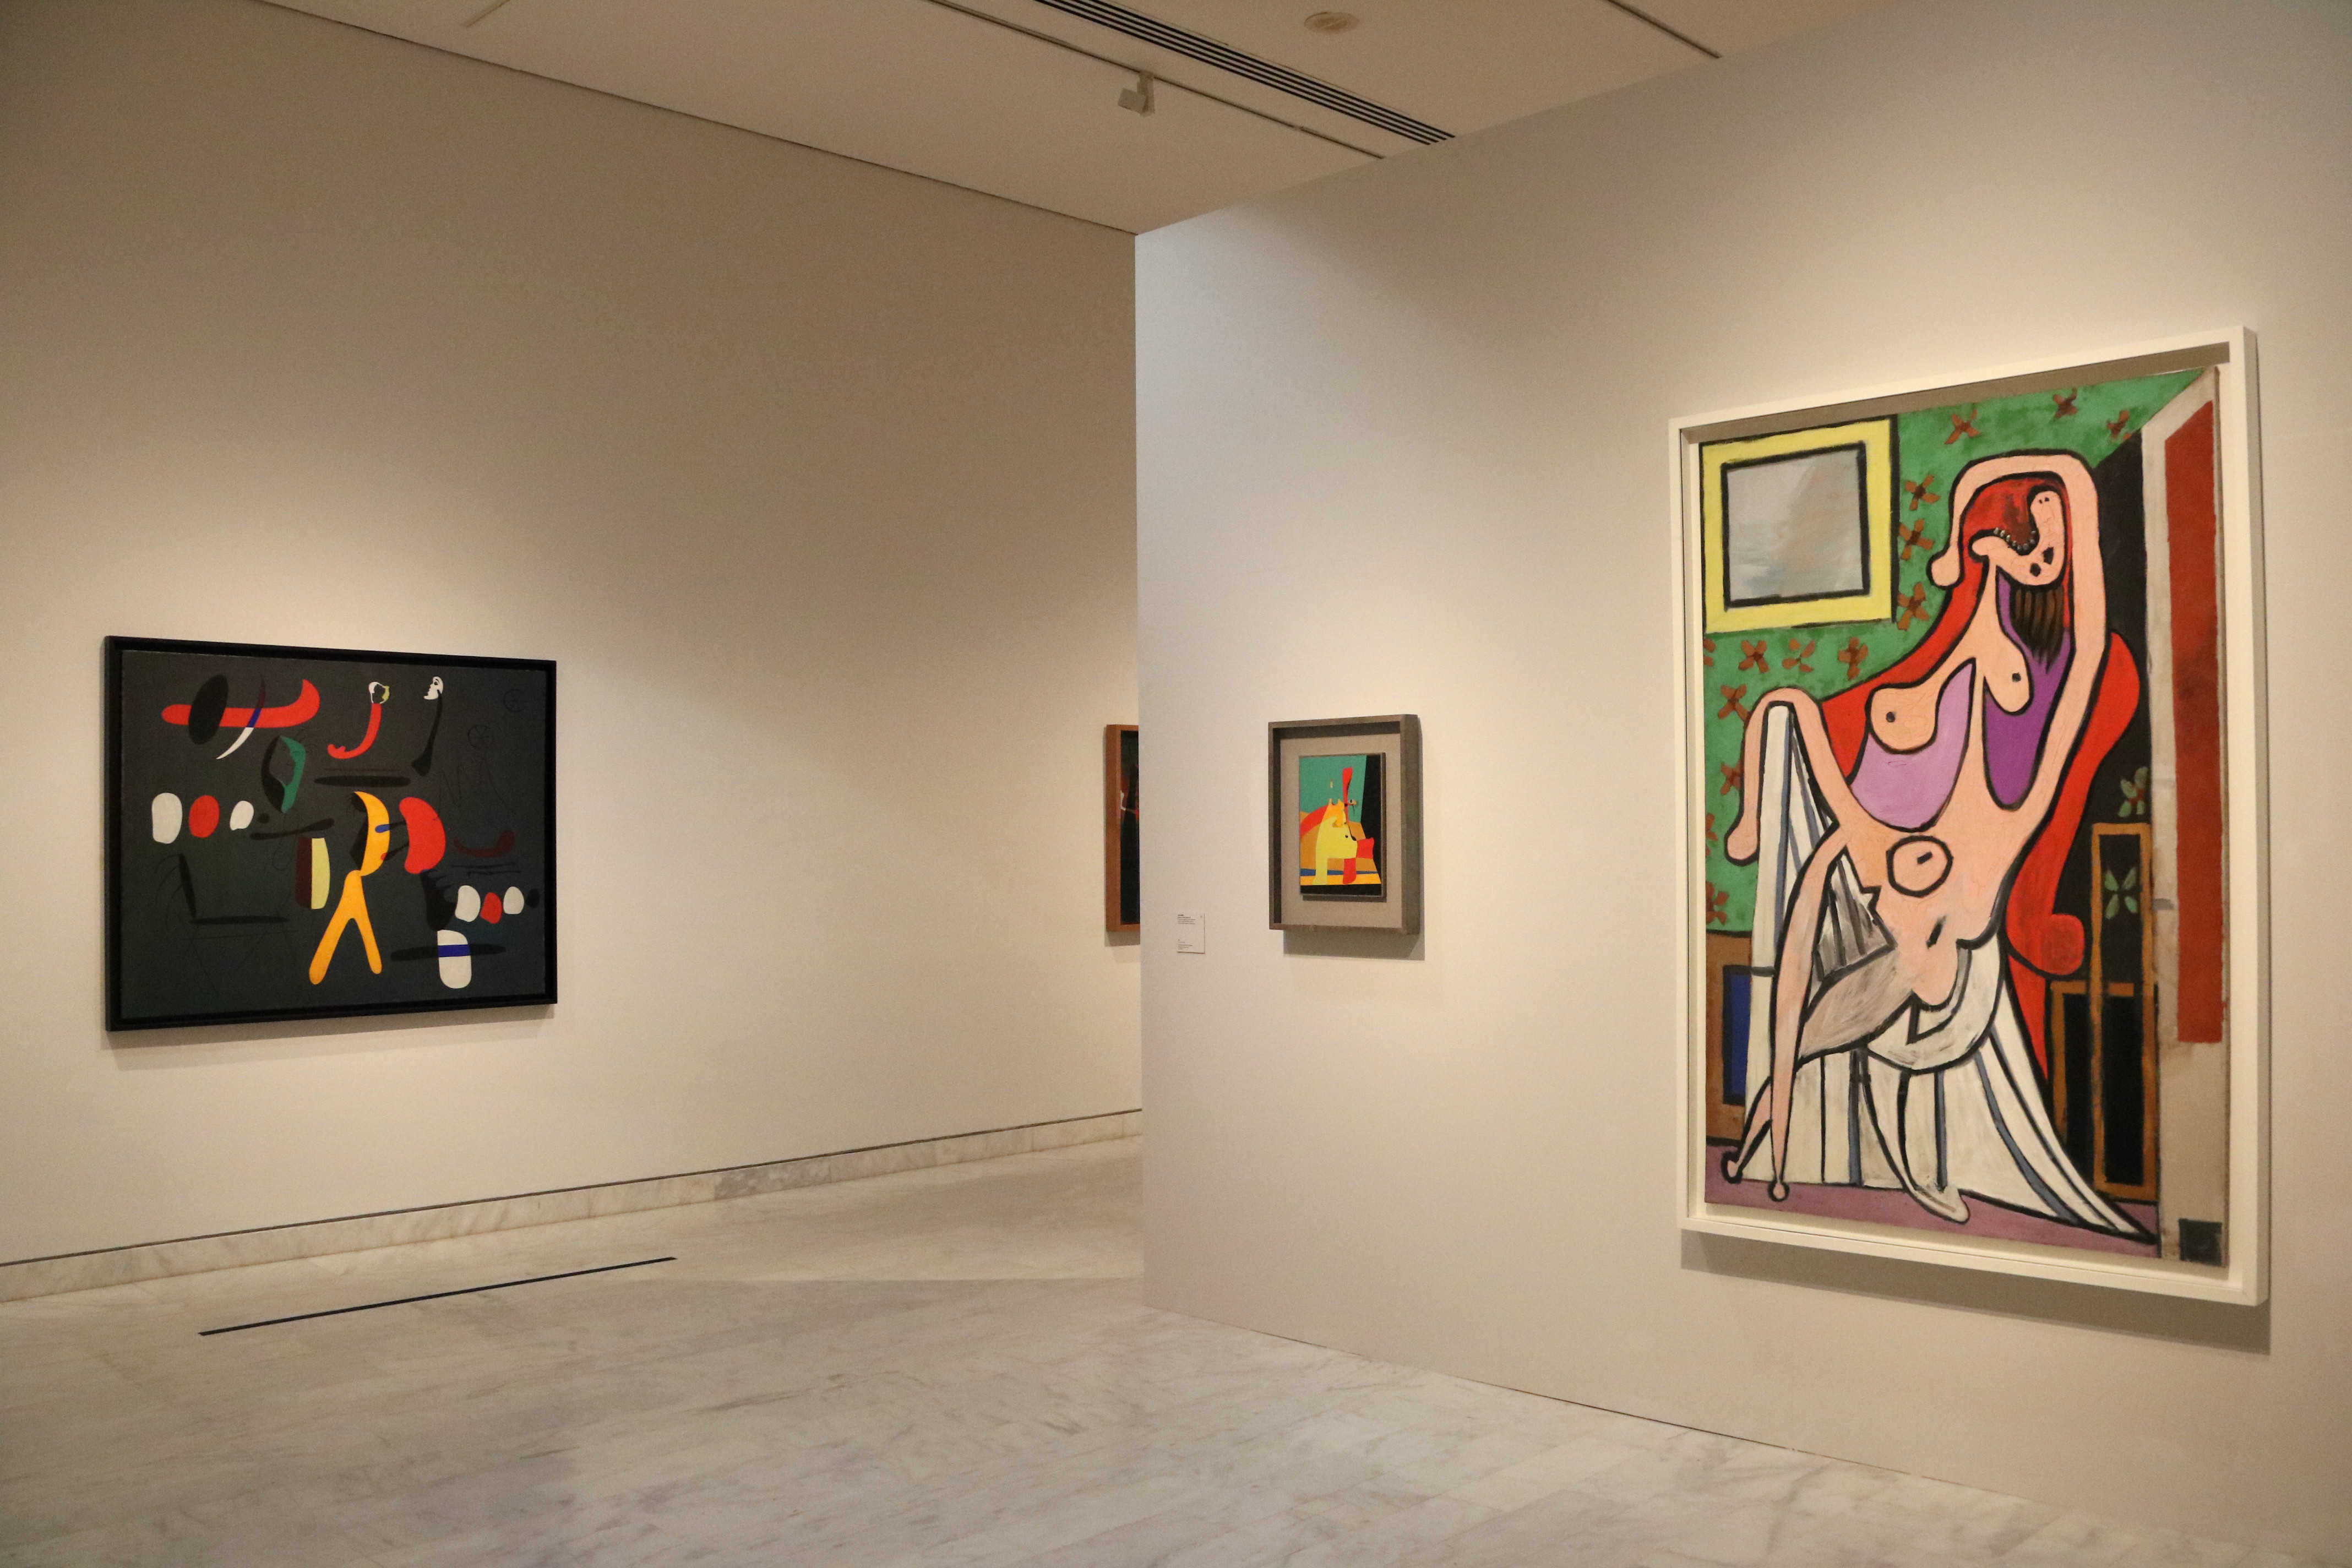 'Miró-Picasso' exhibition at the Picasso Museum